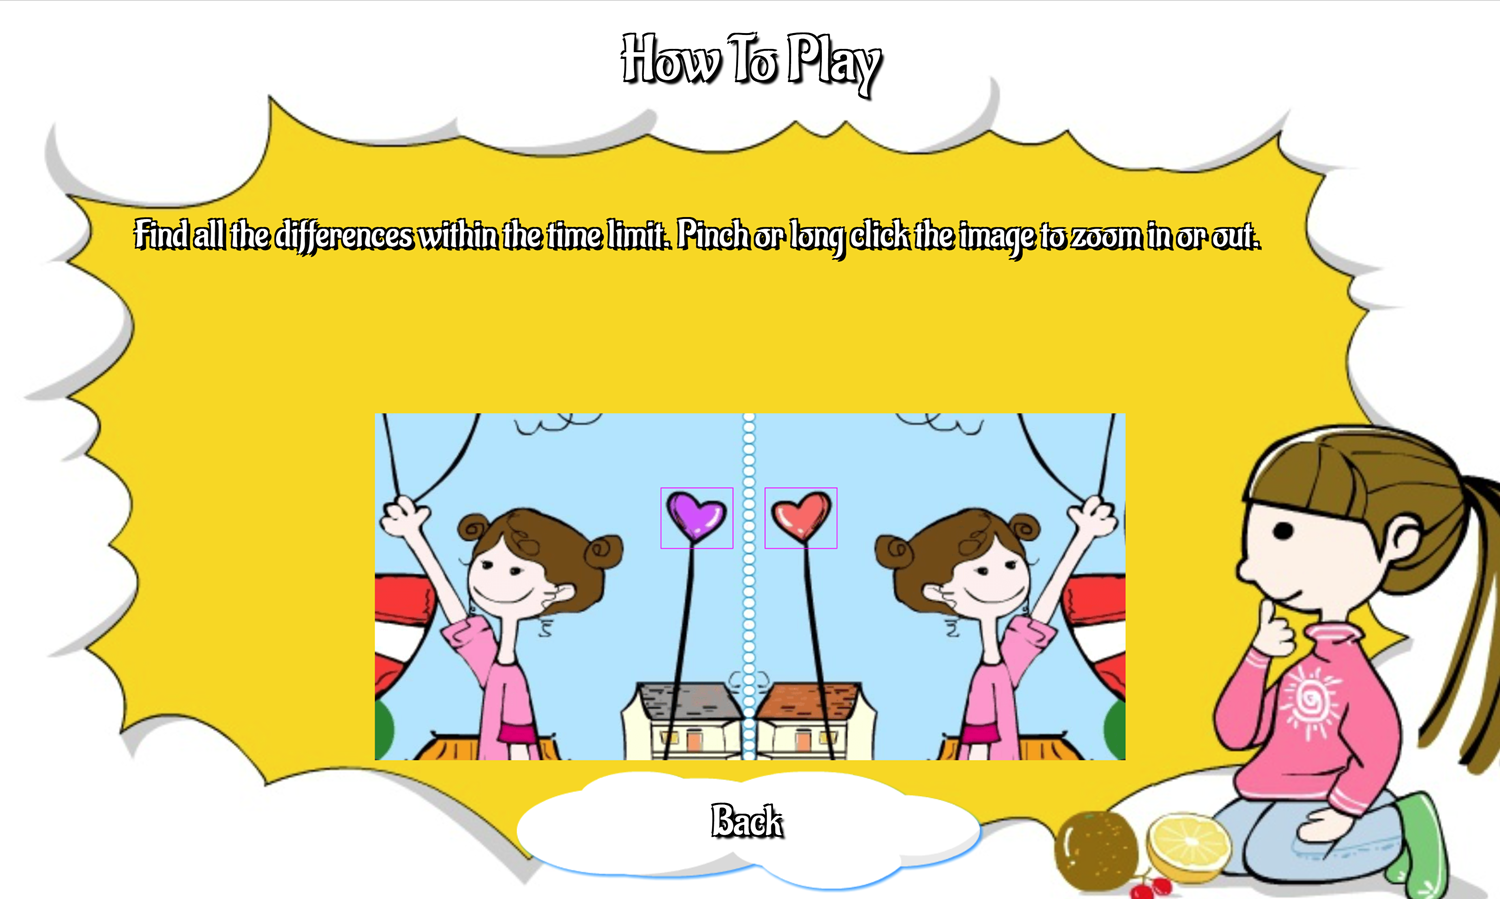 Playground Differences Game How to Play Screen Screenshot.